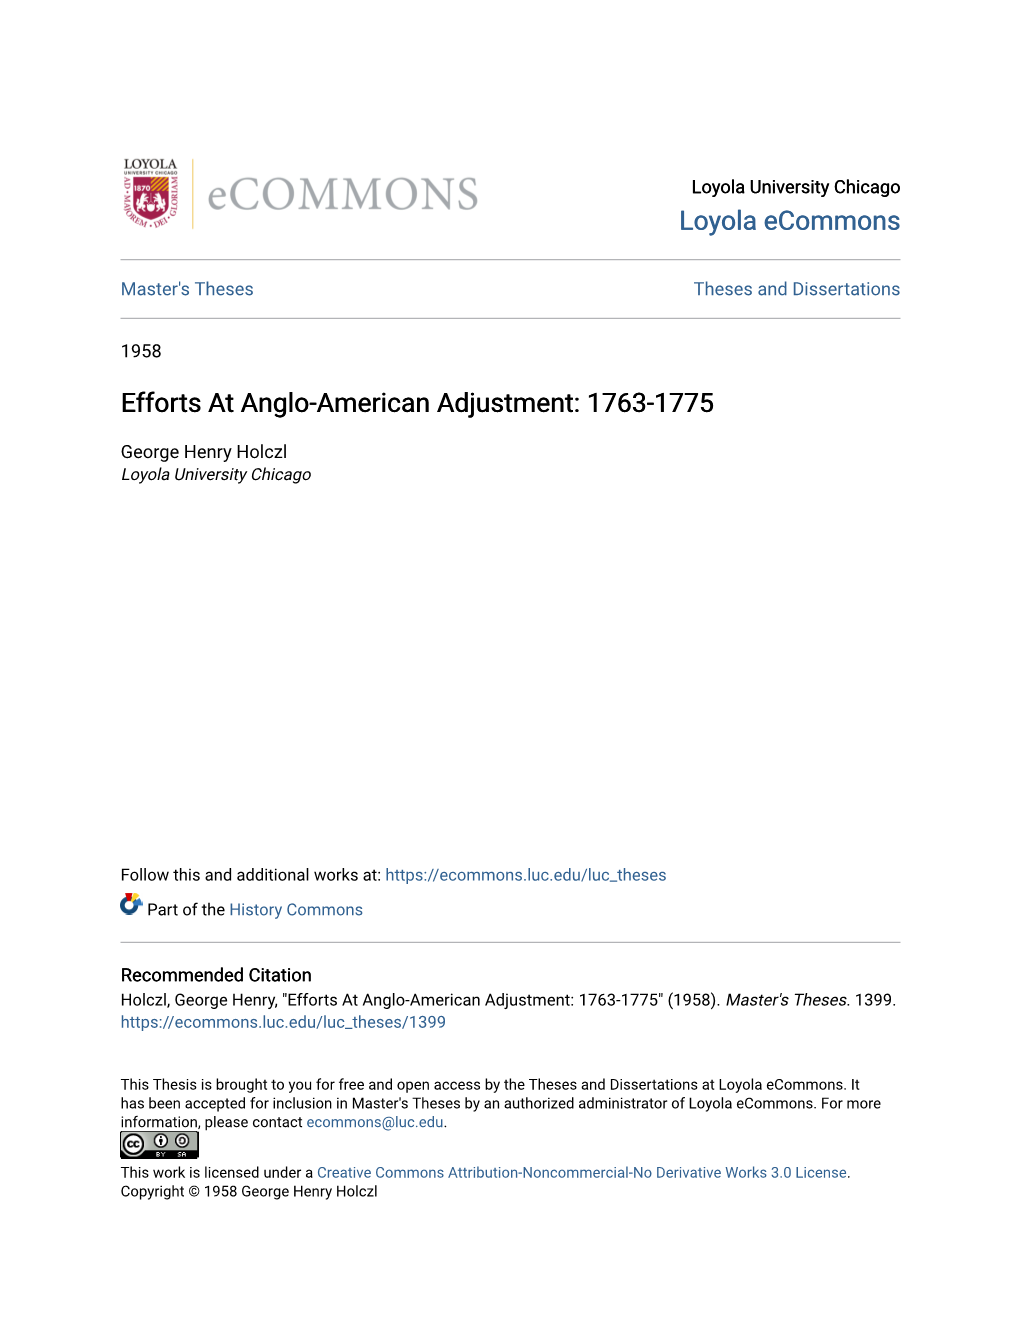 Efforts at Anglo-American Adjustment: 1763-1775